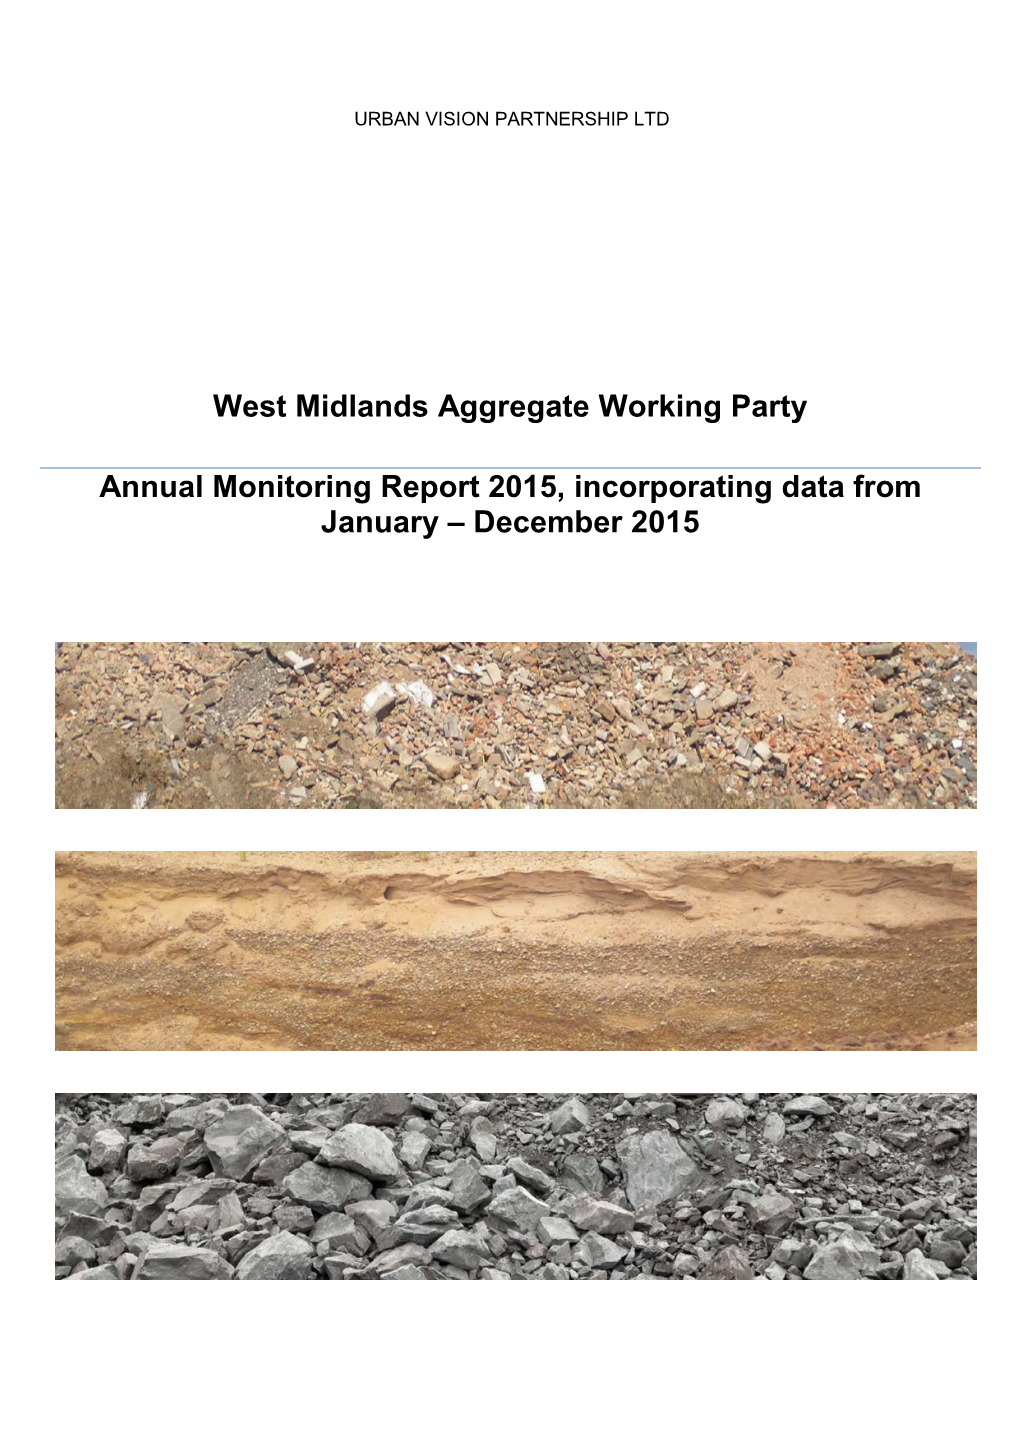 West Midlands Aggregate Working Party